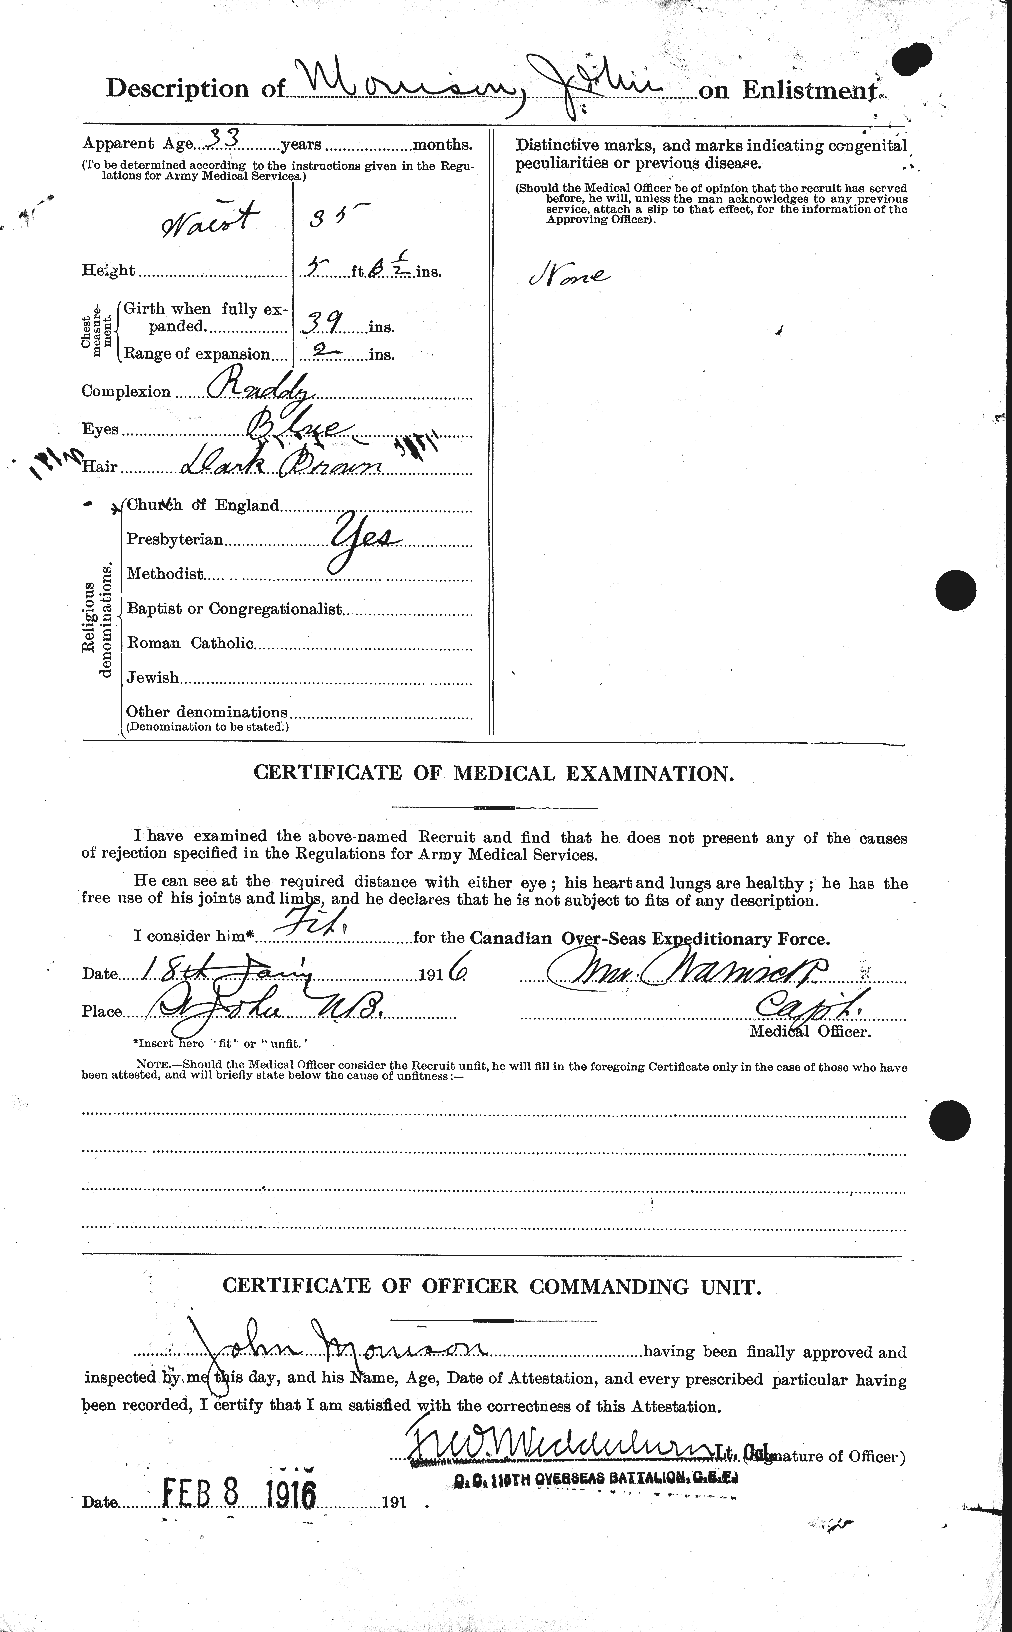 Personnel Records of the First World War - CEF 506986b